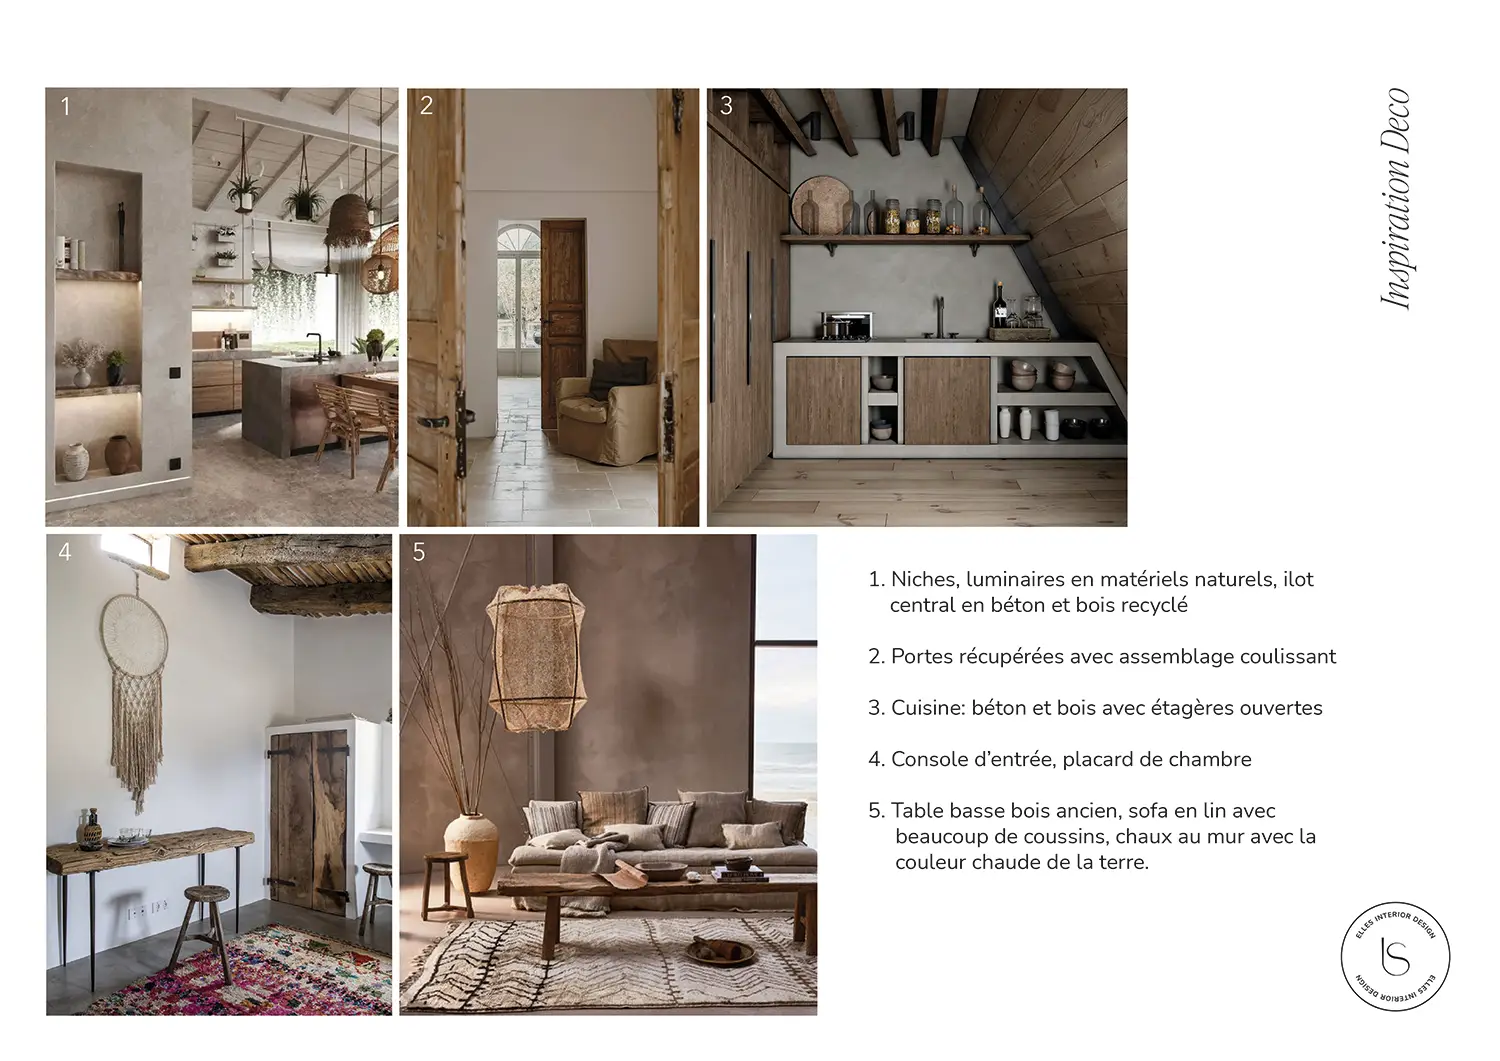 Moodboard to inspire the interiors of the renovation consultancy Cascina in Auvergne, by Elles Interior Design.